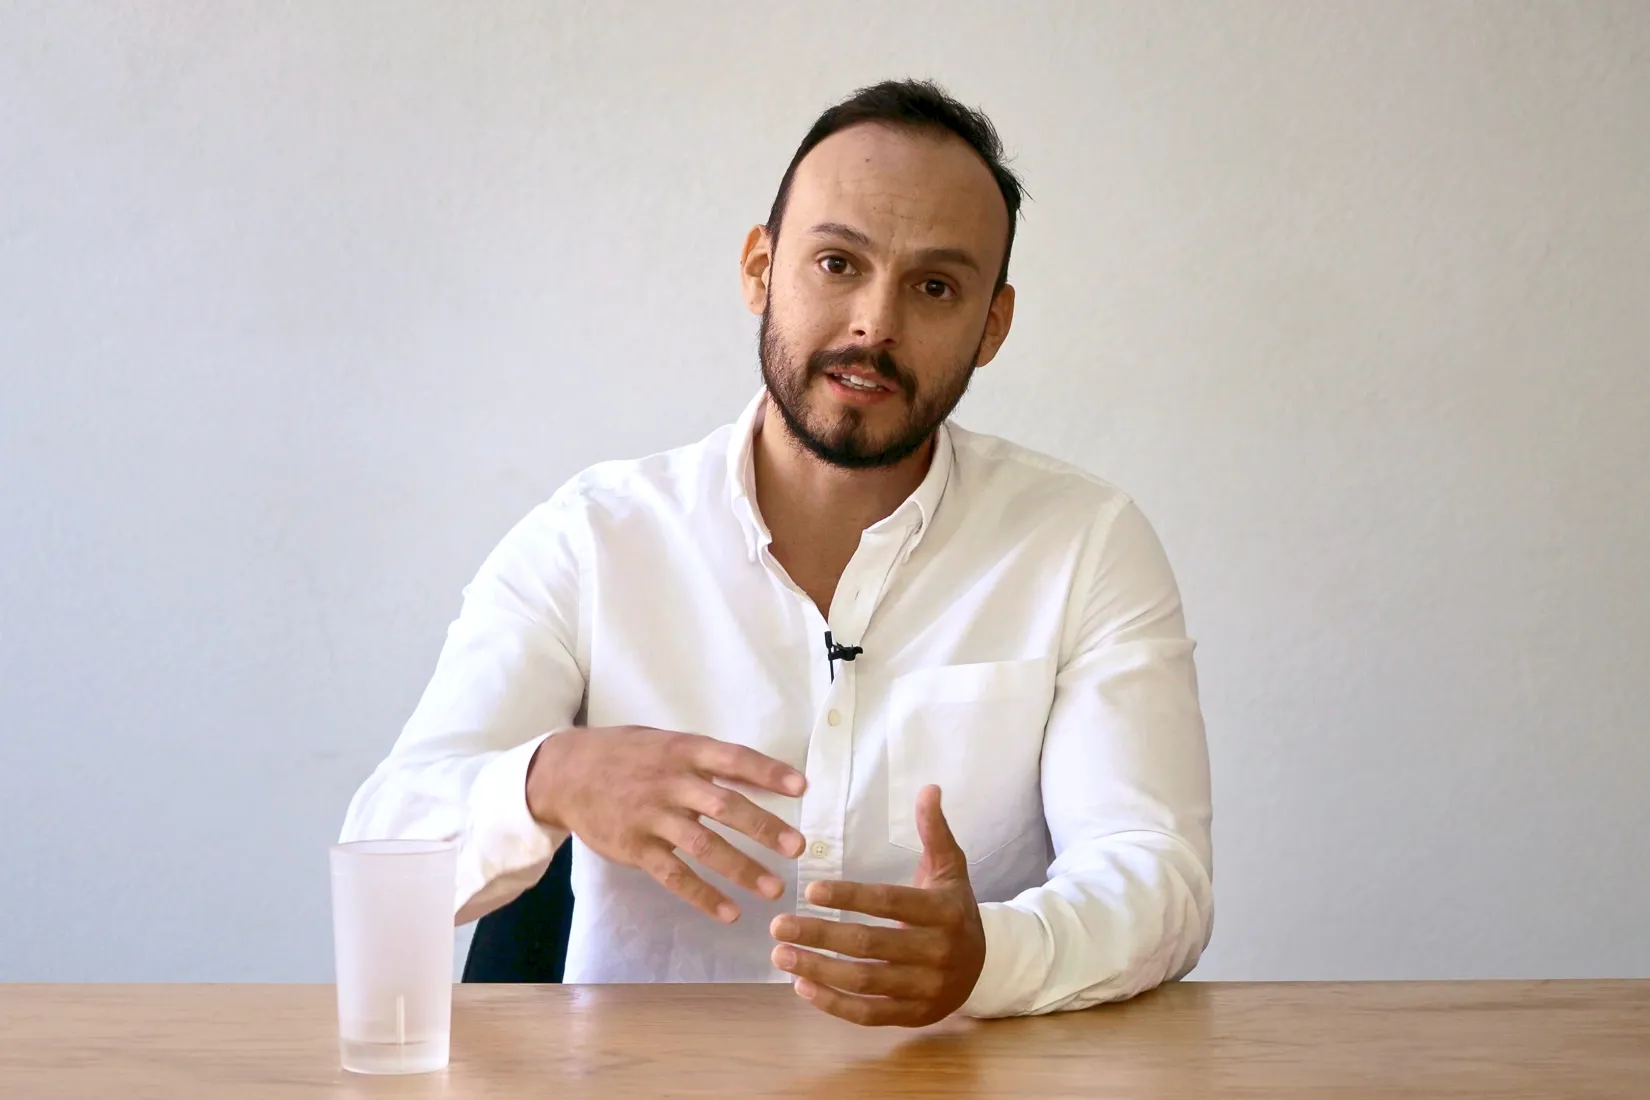 Paco Flores, a designer and sustainability consultant